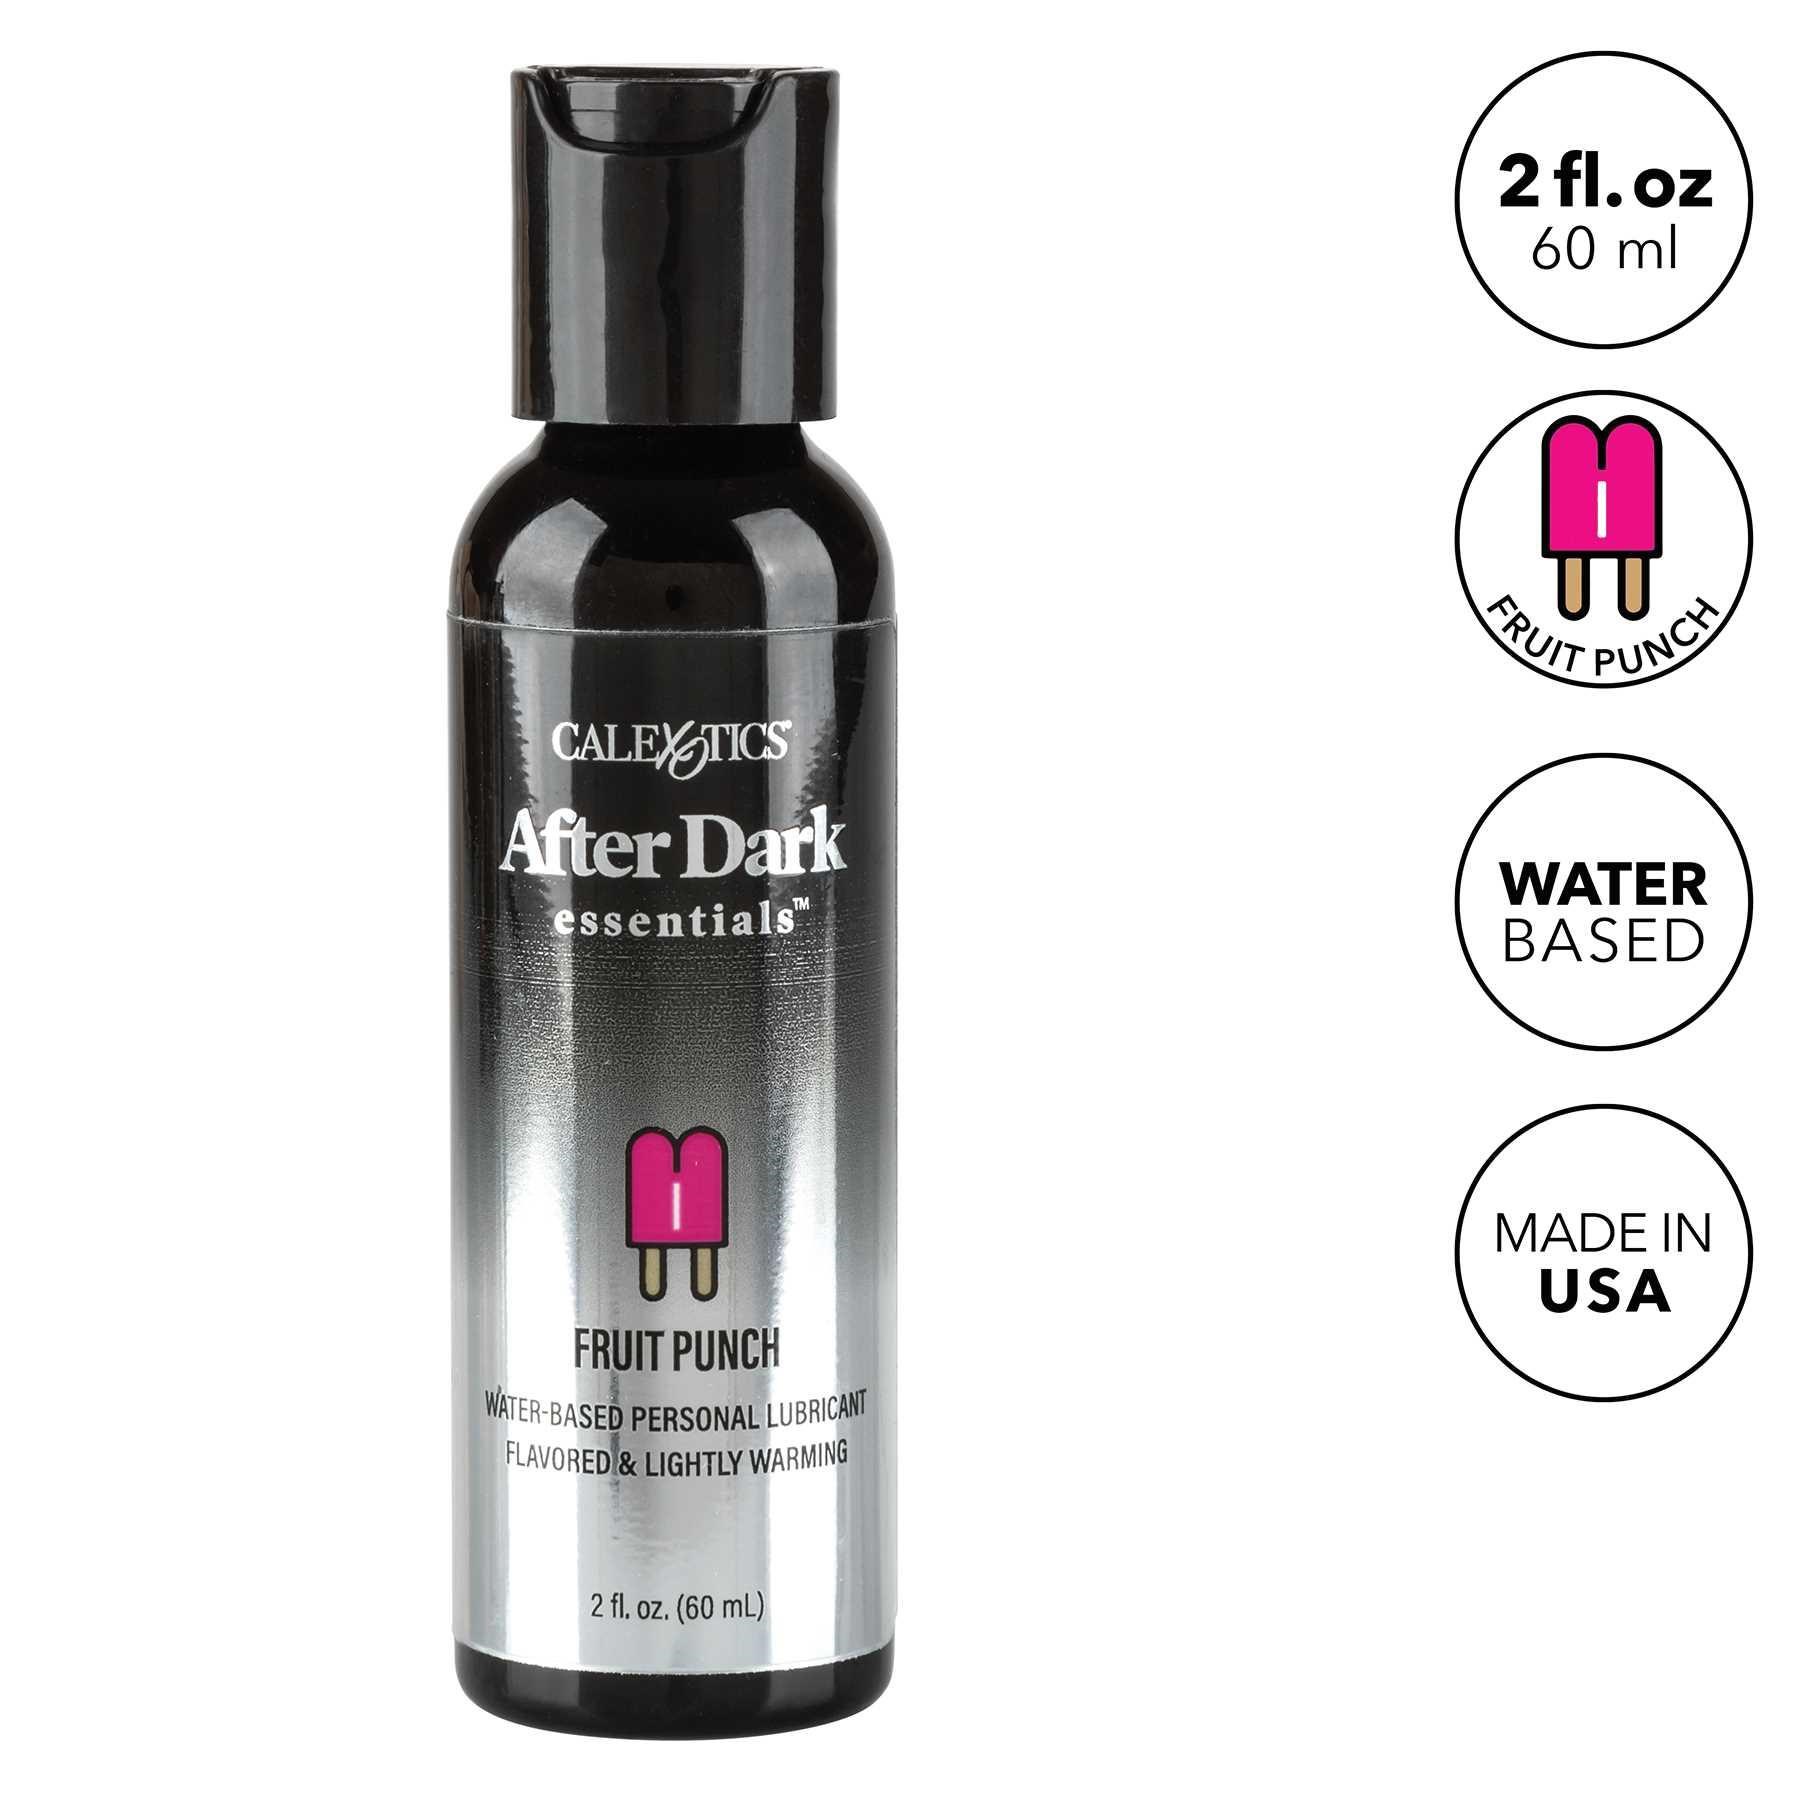 After Dark Essentials Flavored Lubricant fruit punch bullet point